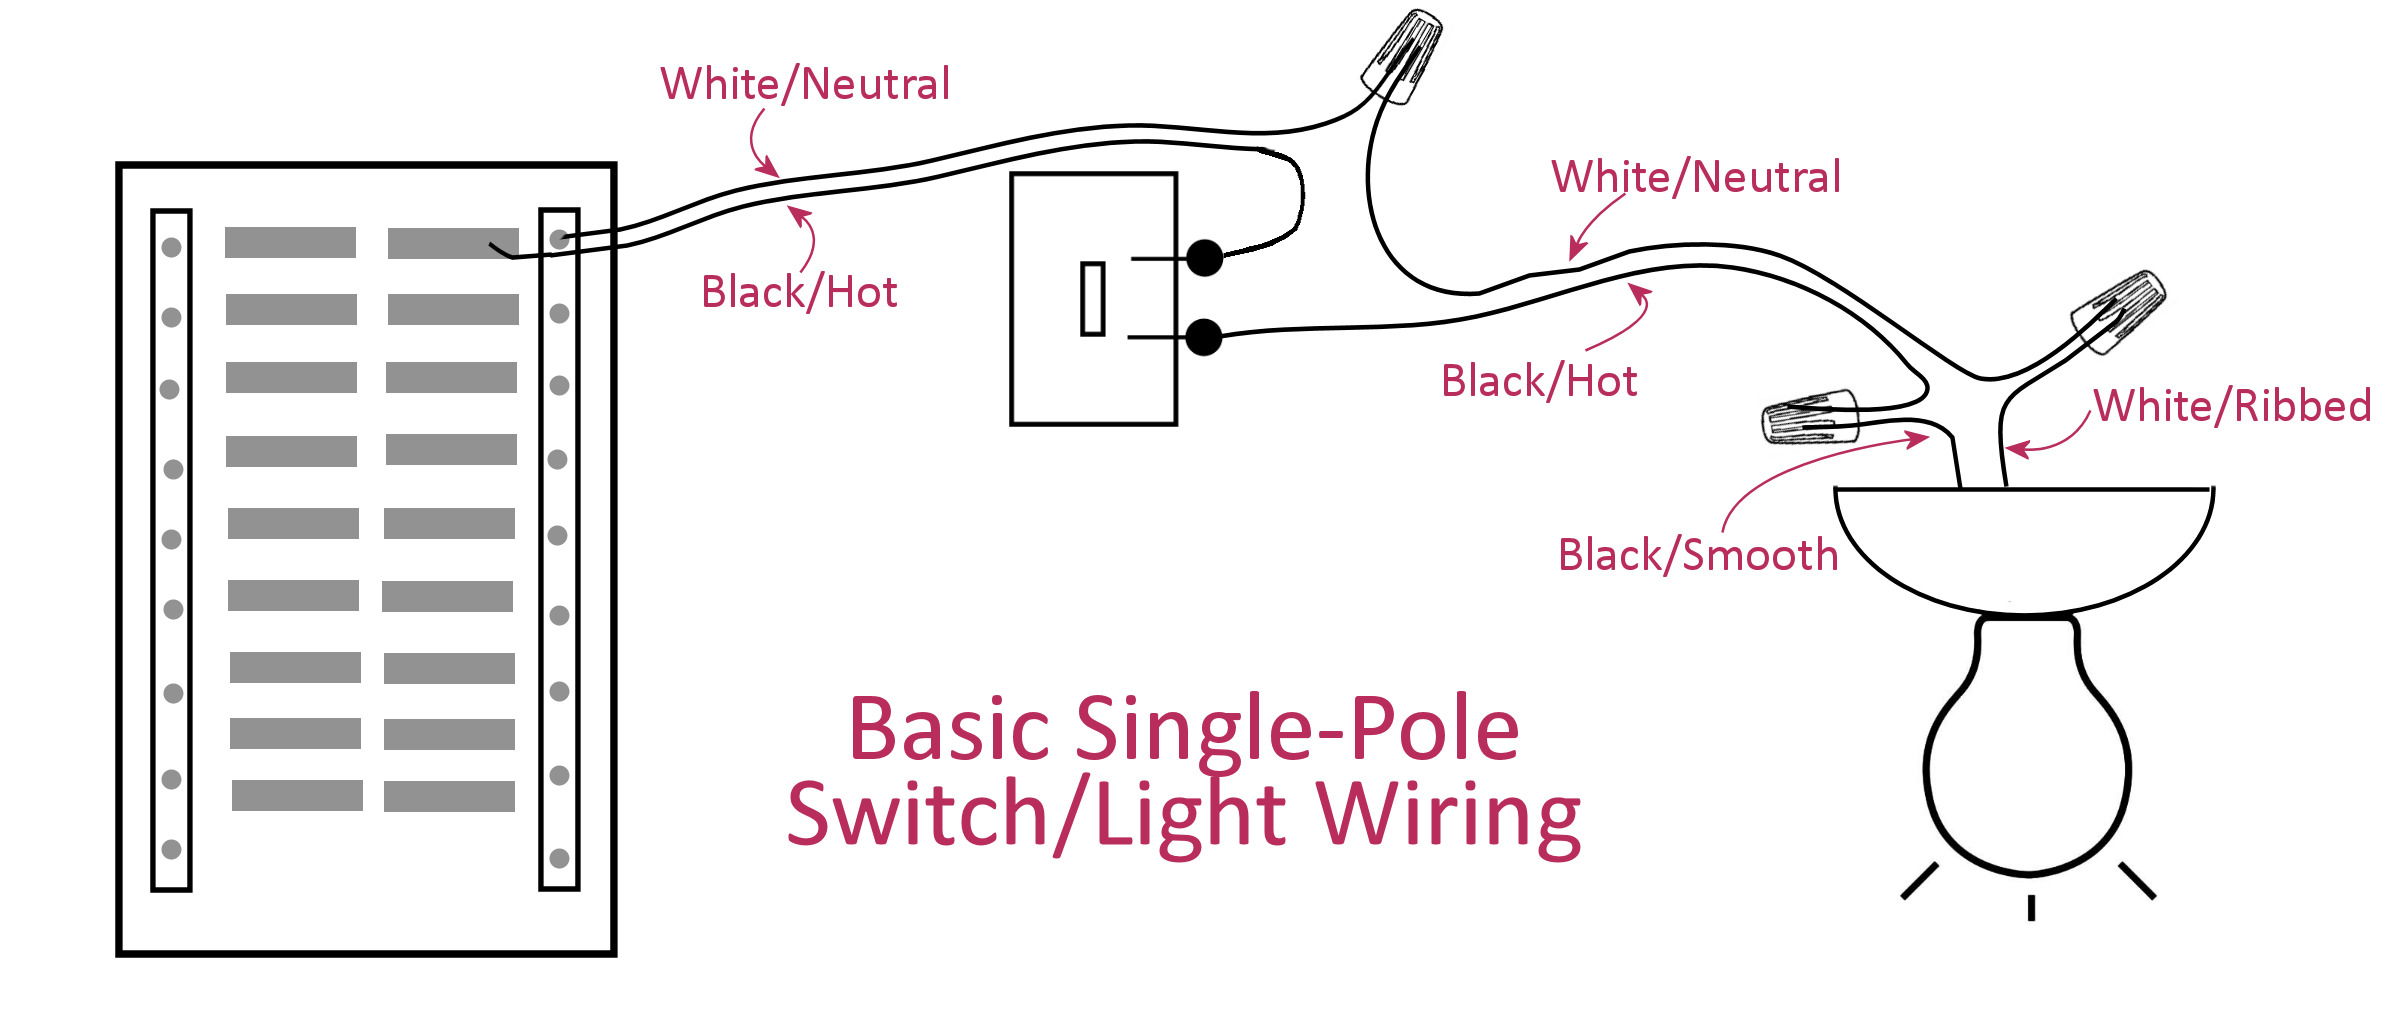 Wiring Diagram For Light Switch And Outlet In Same Box from www.addicted2decorating.com